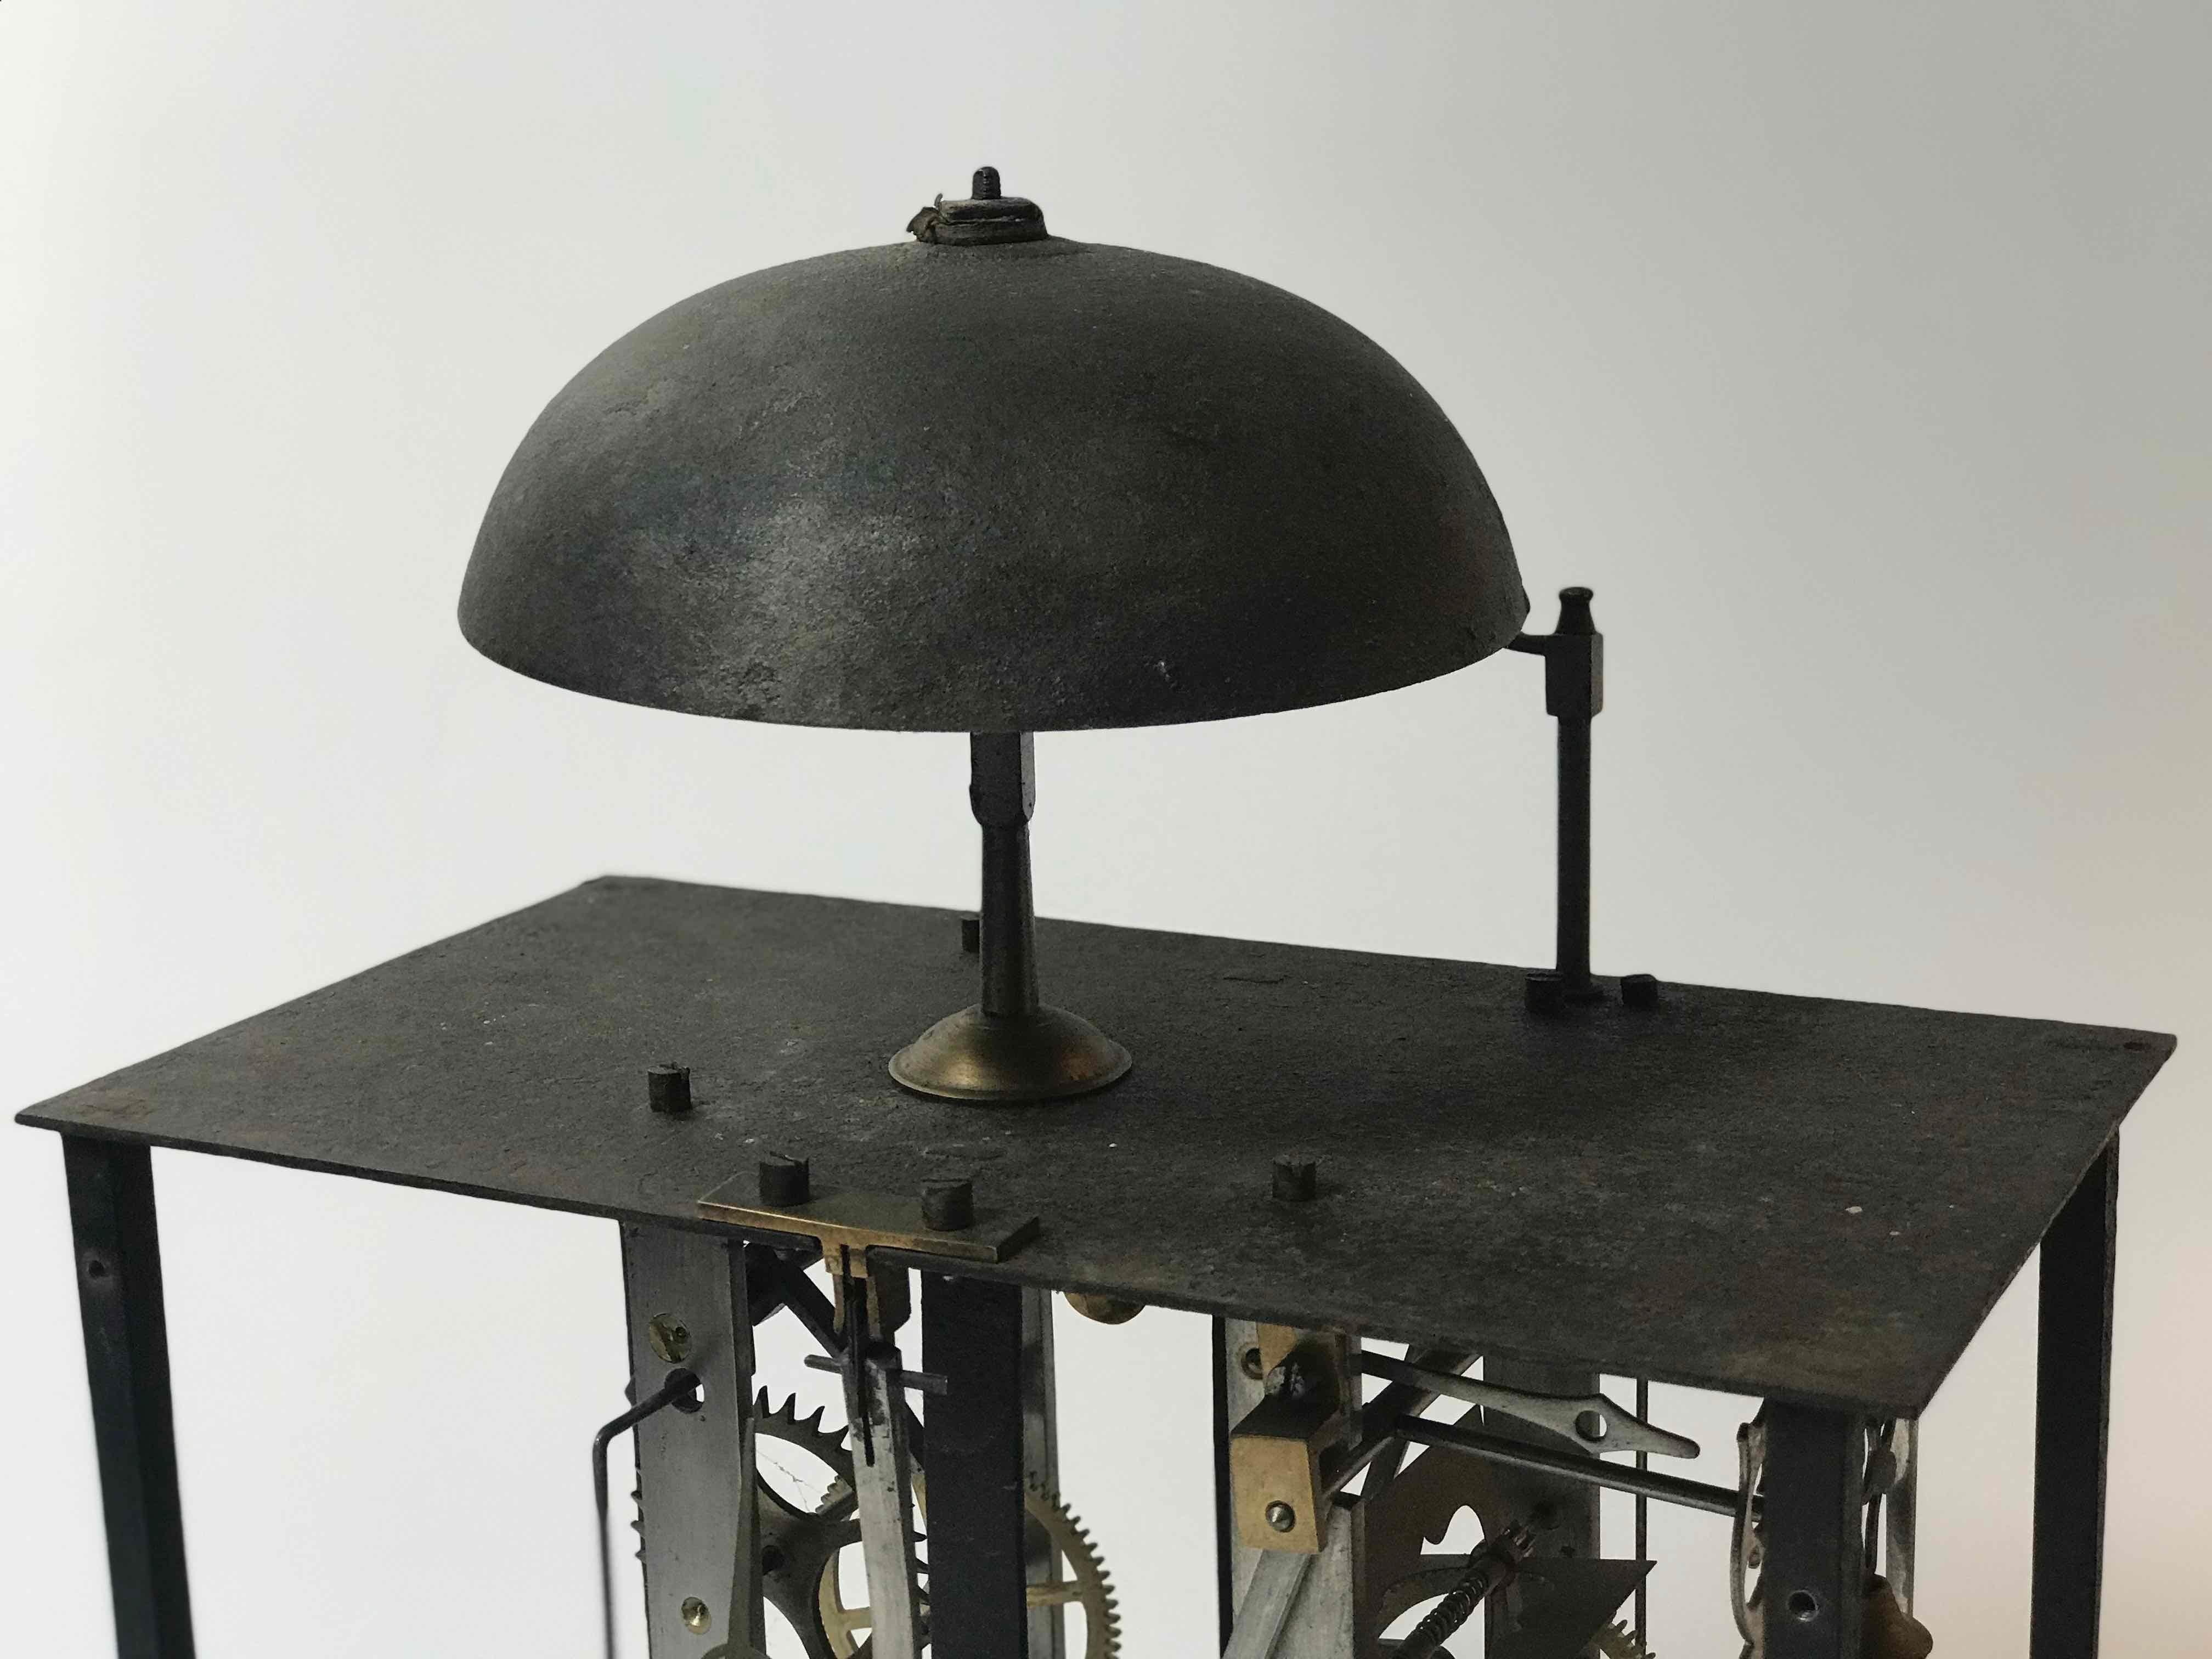 19th-century French clockworks mounted on stand. A unique sculptural piece, this longcase clock has been stripped of its exterior surfacing to reveal the complex operations within. Mounted on a black metal stand, the piece has a gritty, industrial